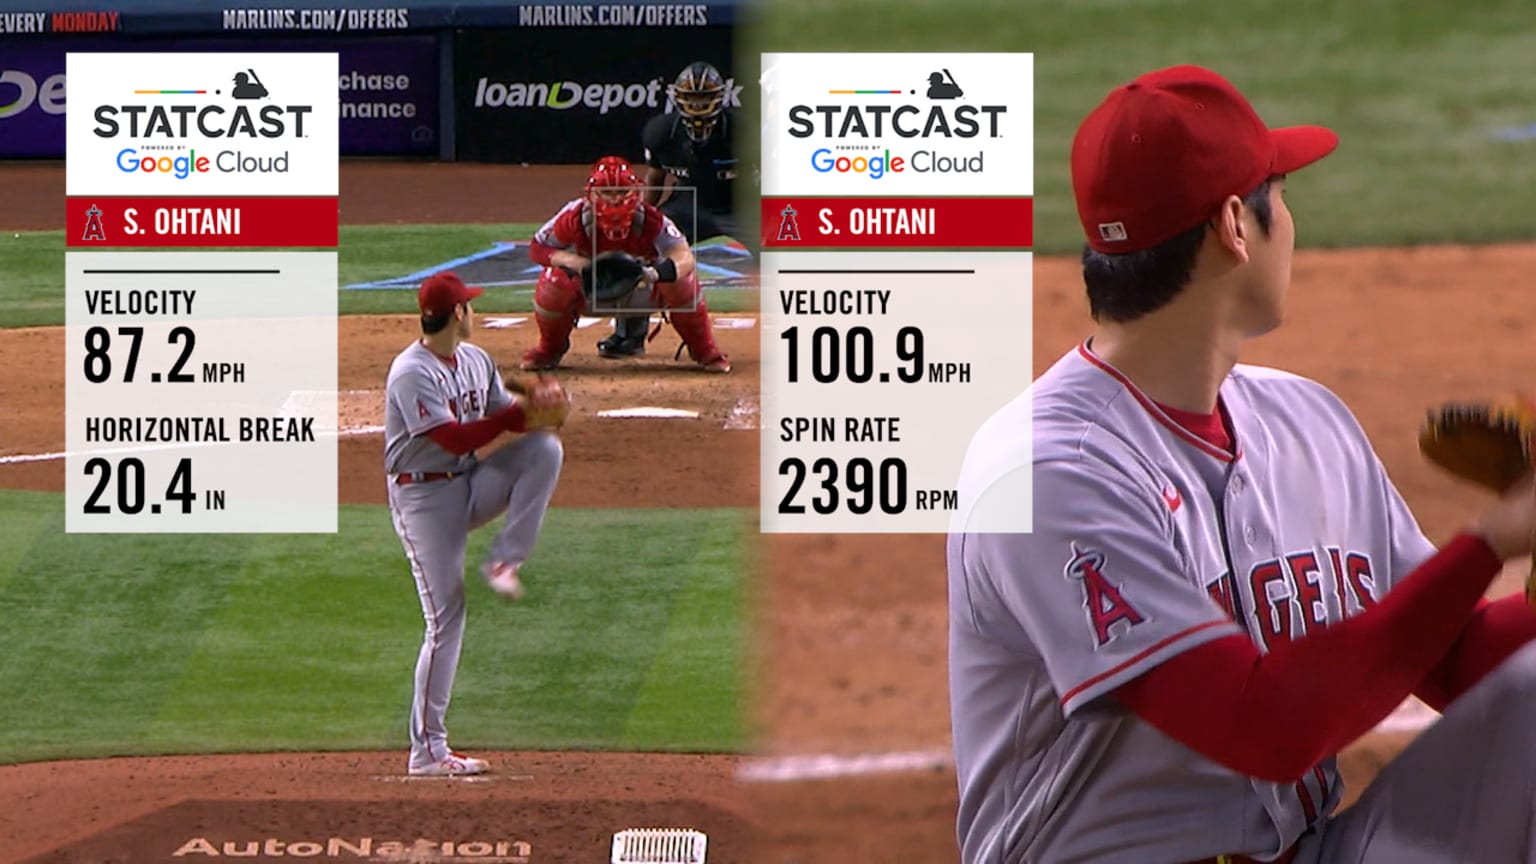 Dual-threat star Ohtani pitches 100mph then hits 450ft HR in same